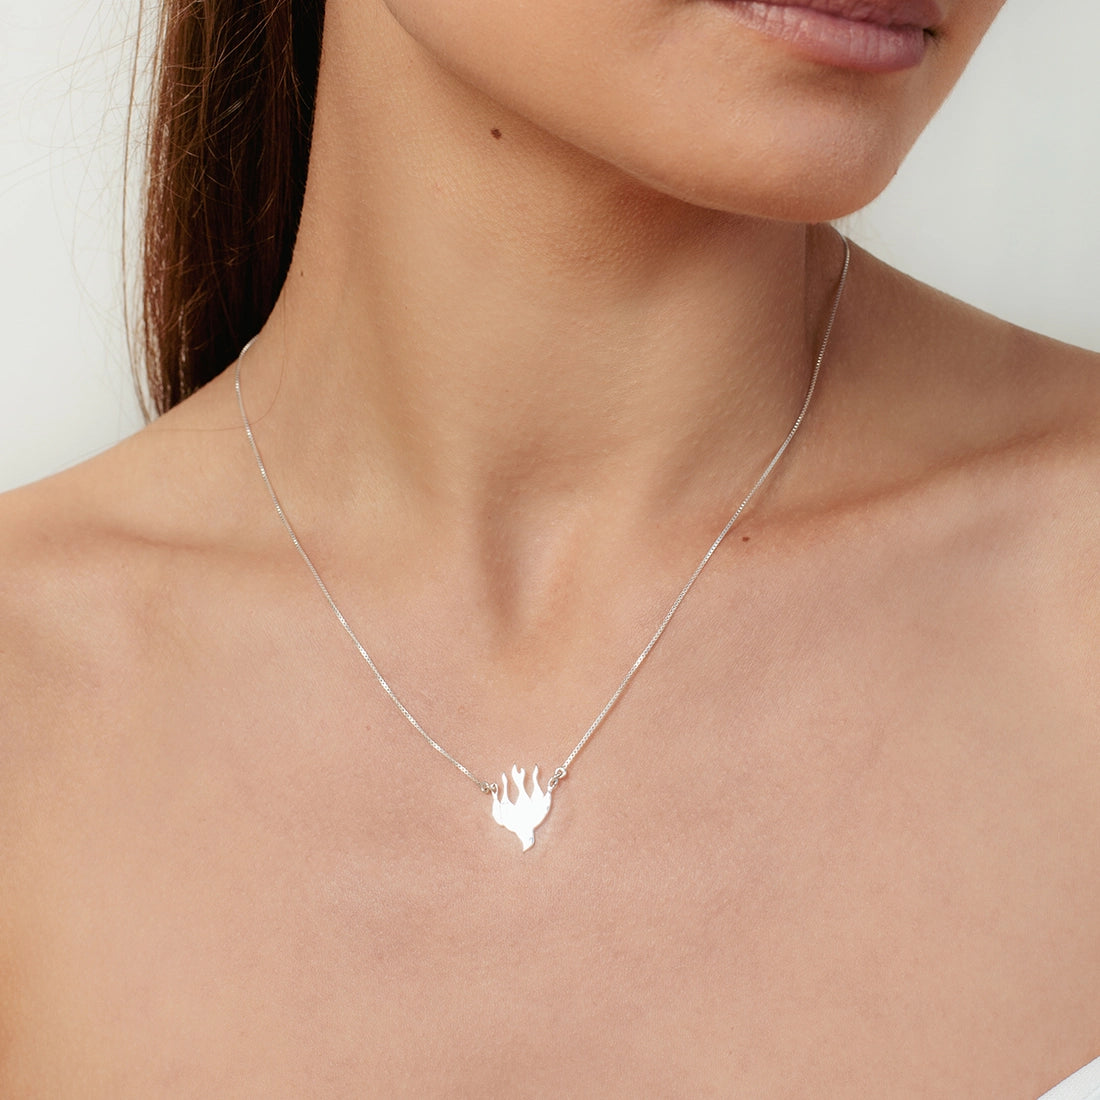 Christian woman wearing the Chispa de la Dove Necklace in sterling silver from the Chispa Collection by Rizen Jewelry.